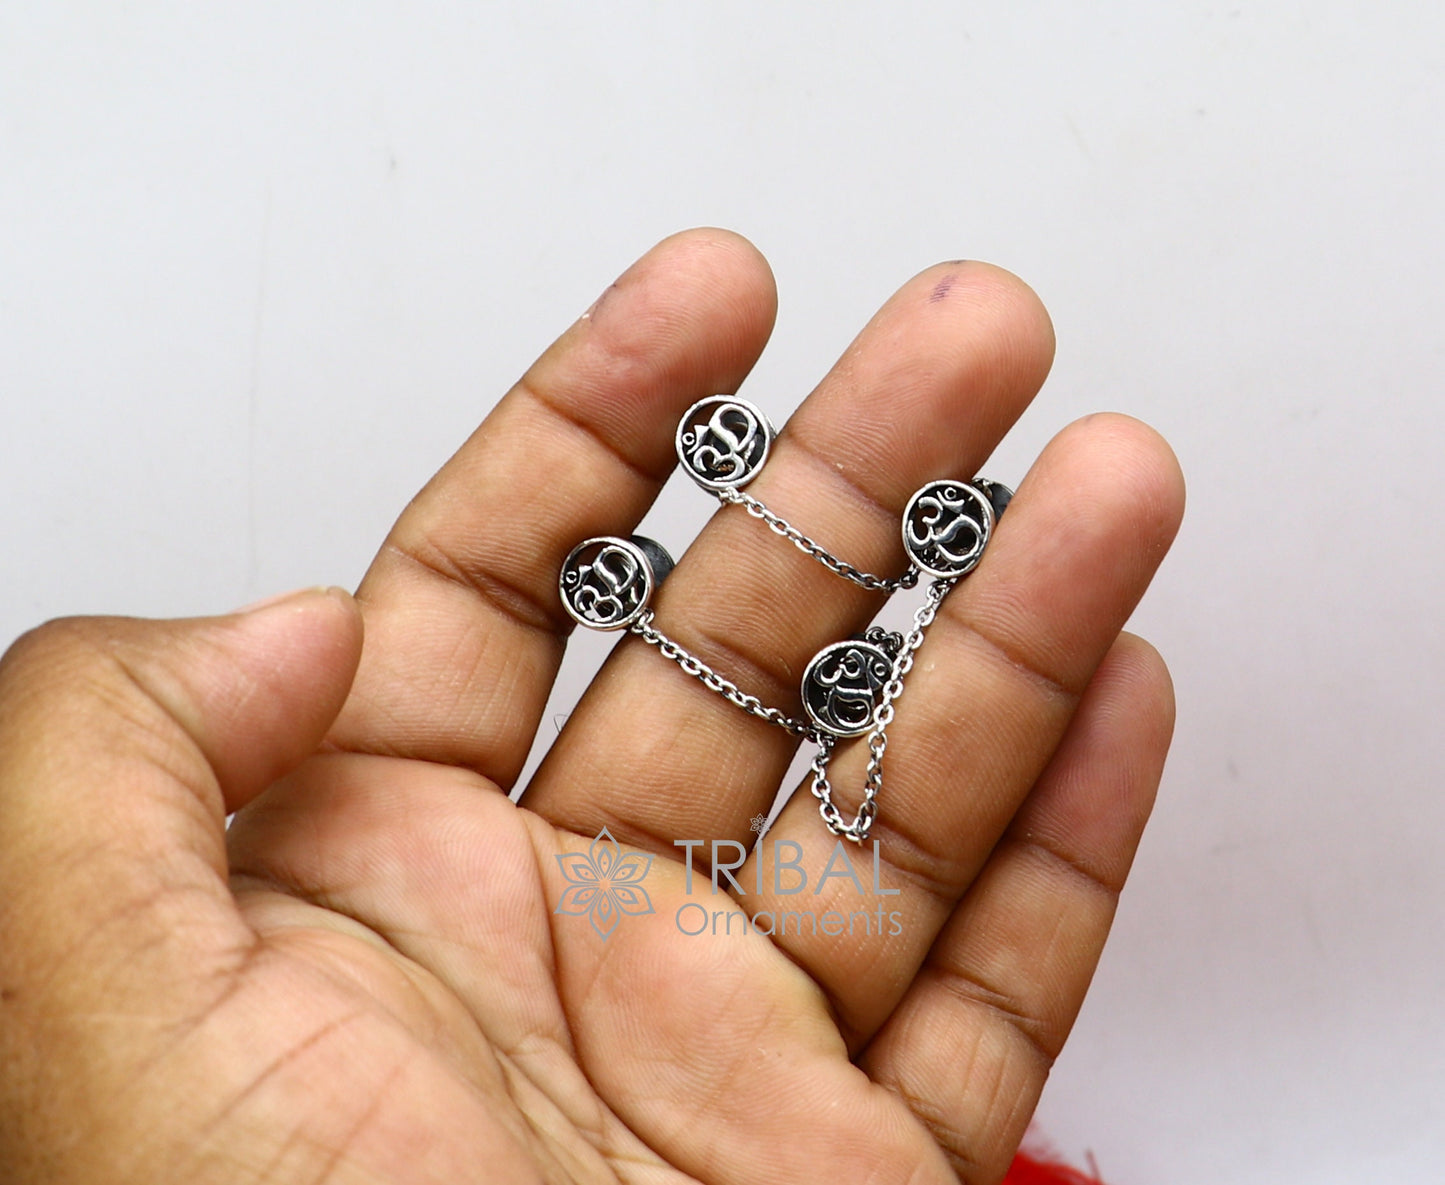 925 Sterling silver handmade gorgeous sign Aum or OM design high-quality buttons or cufflinks for kurtas, best gifting jewelry btn30 - TRIBAL ORNAMENTS